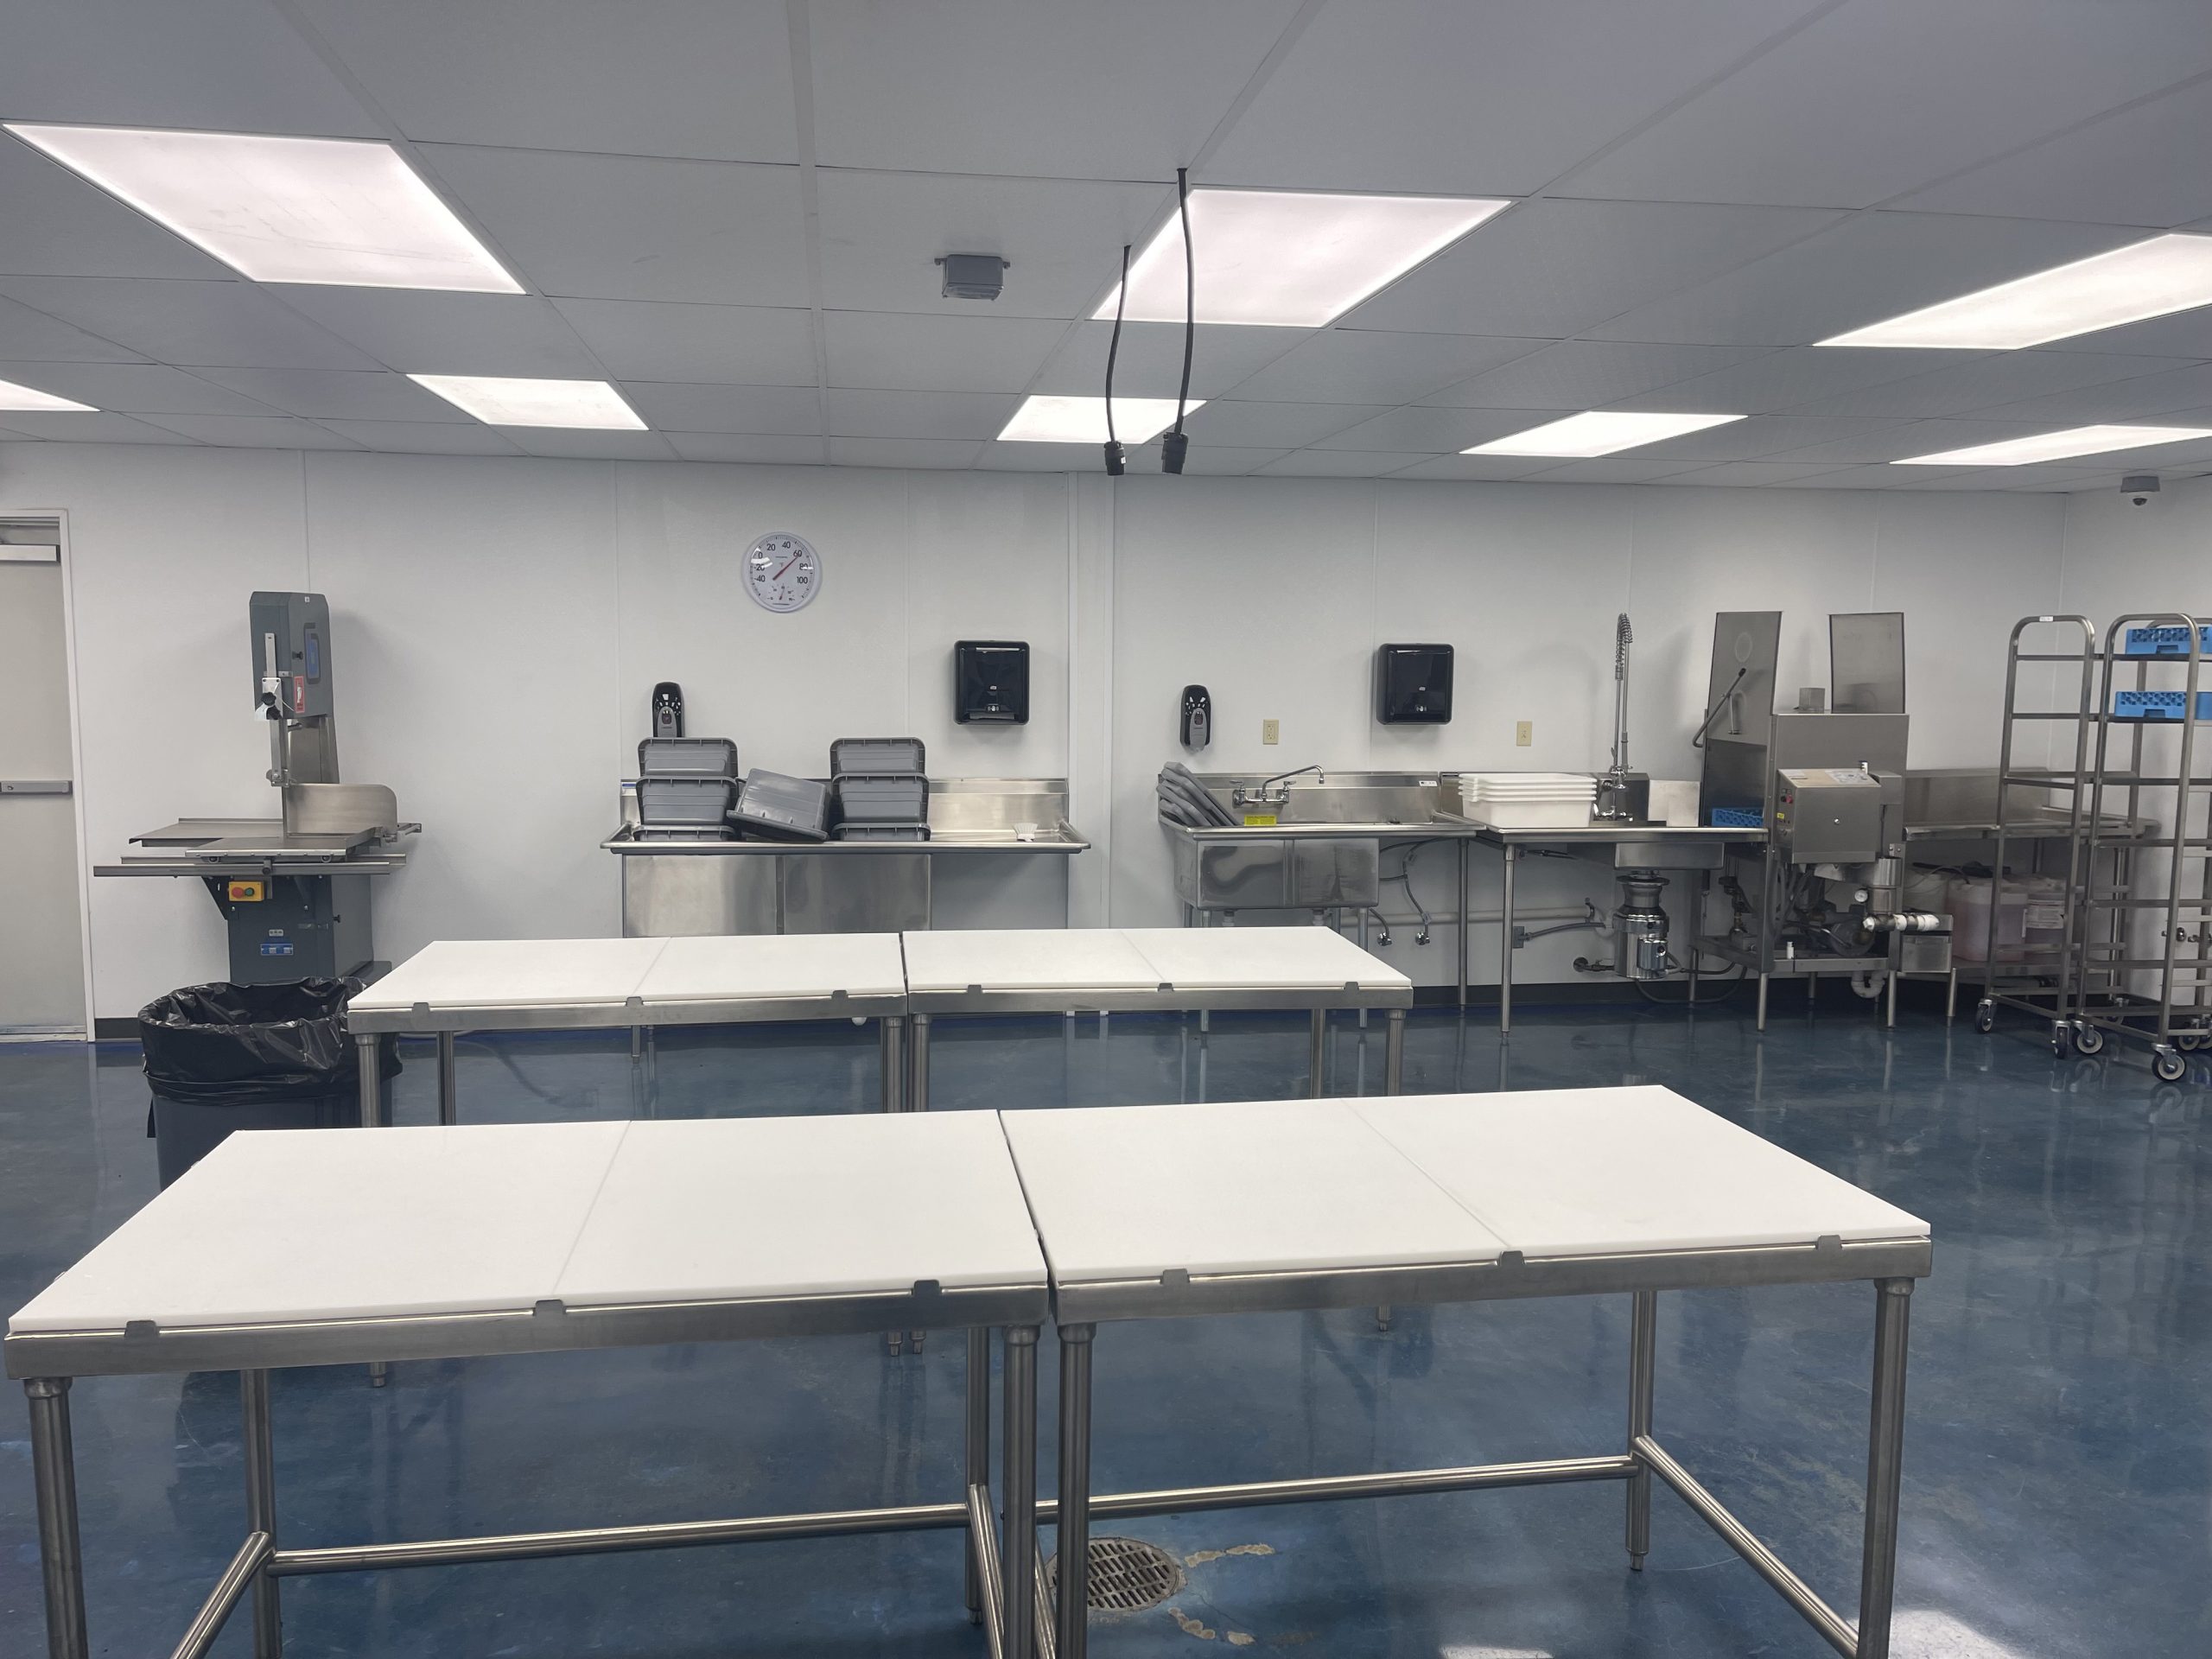 The Hartshorne FFA chapter's new meat processign facility includes features such as a walk-in freezer/cooler, industrial dishwasher, meat grinder, a bandsaw to cut bone-in product, vacuum sealers, tenderizers, patty makers, dehydrators, meat stuffers and mixers. (Courtesy photo.)